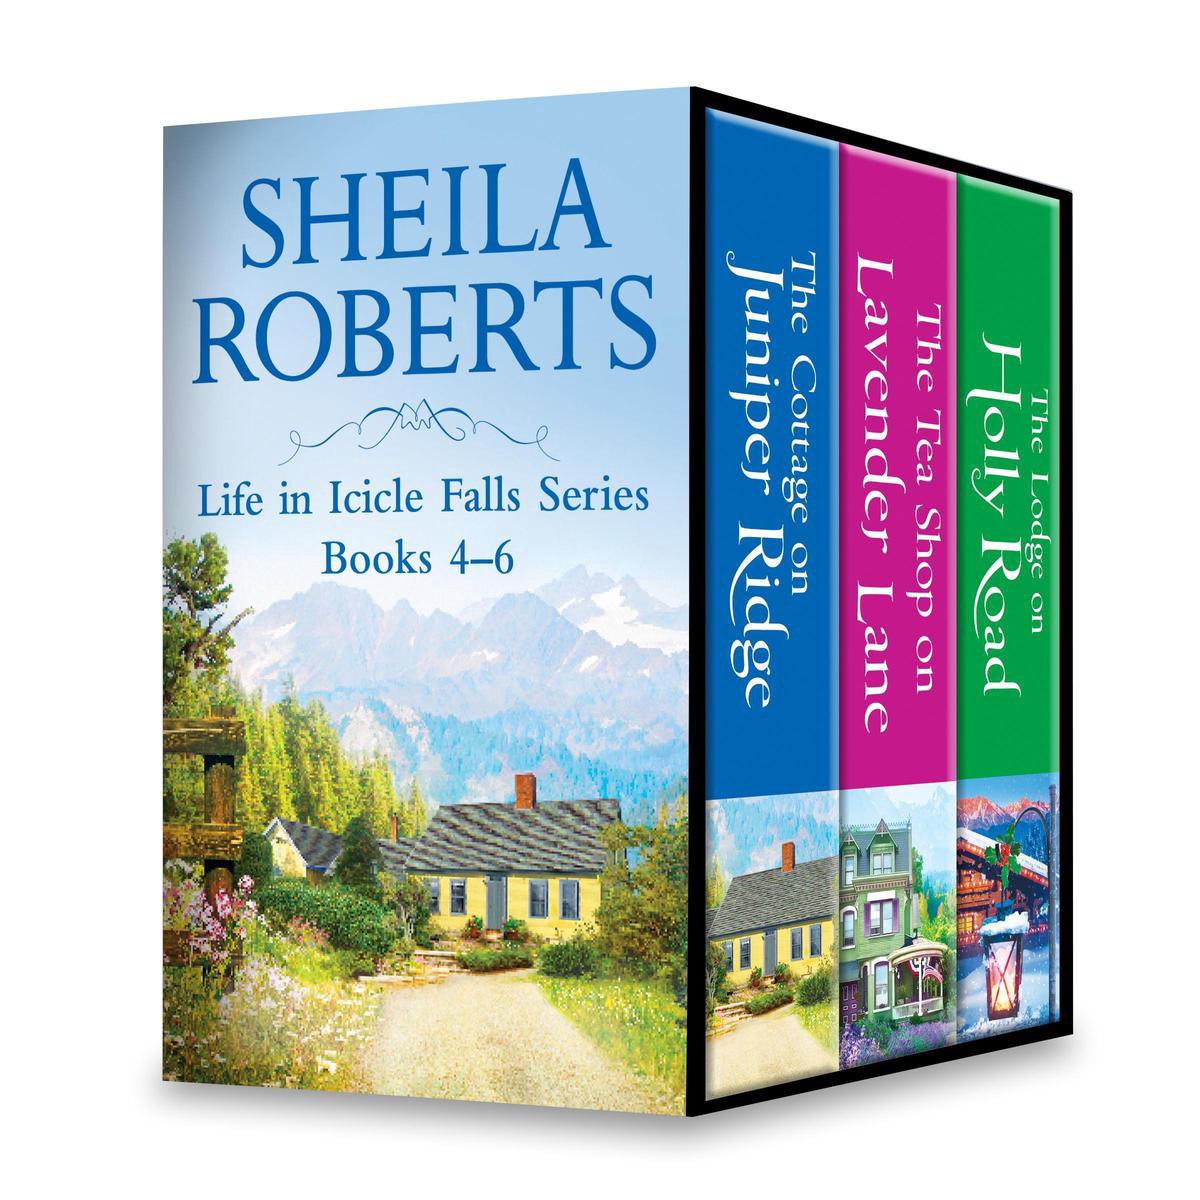 Life in Icicle Falls - Sheila Roberts Life in Icicle Falls Series Books 4-6 - Sheila Roberts